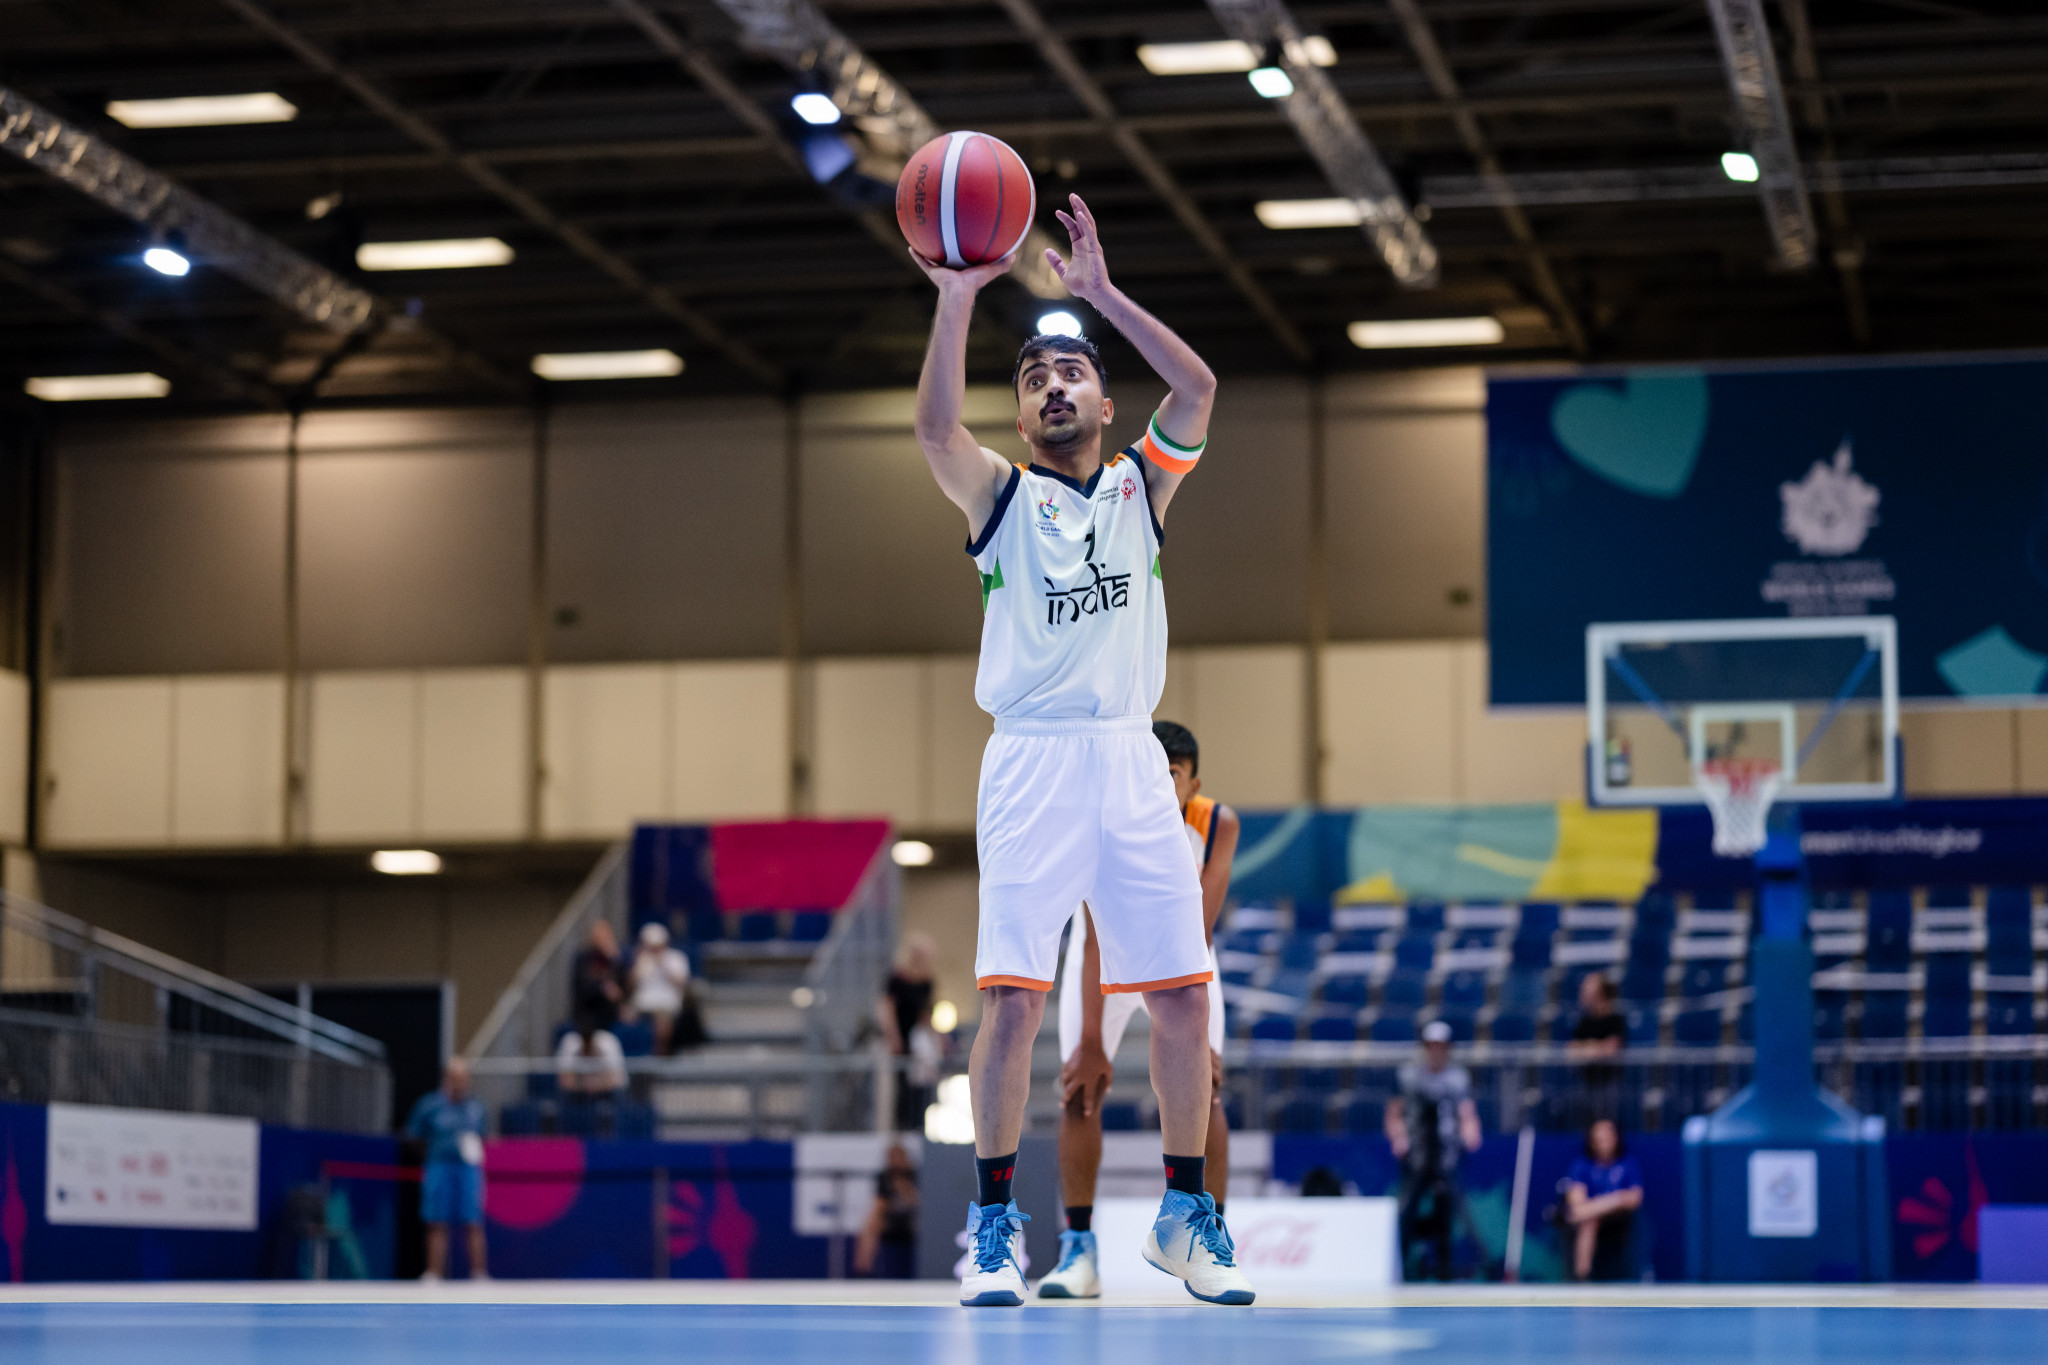 Penultimate day of Special Olympics World Games produces basketball drama in Berlin